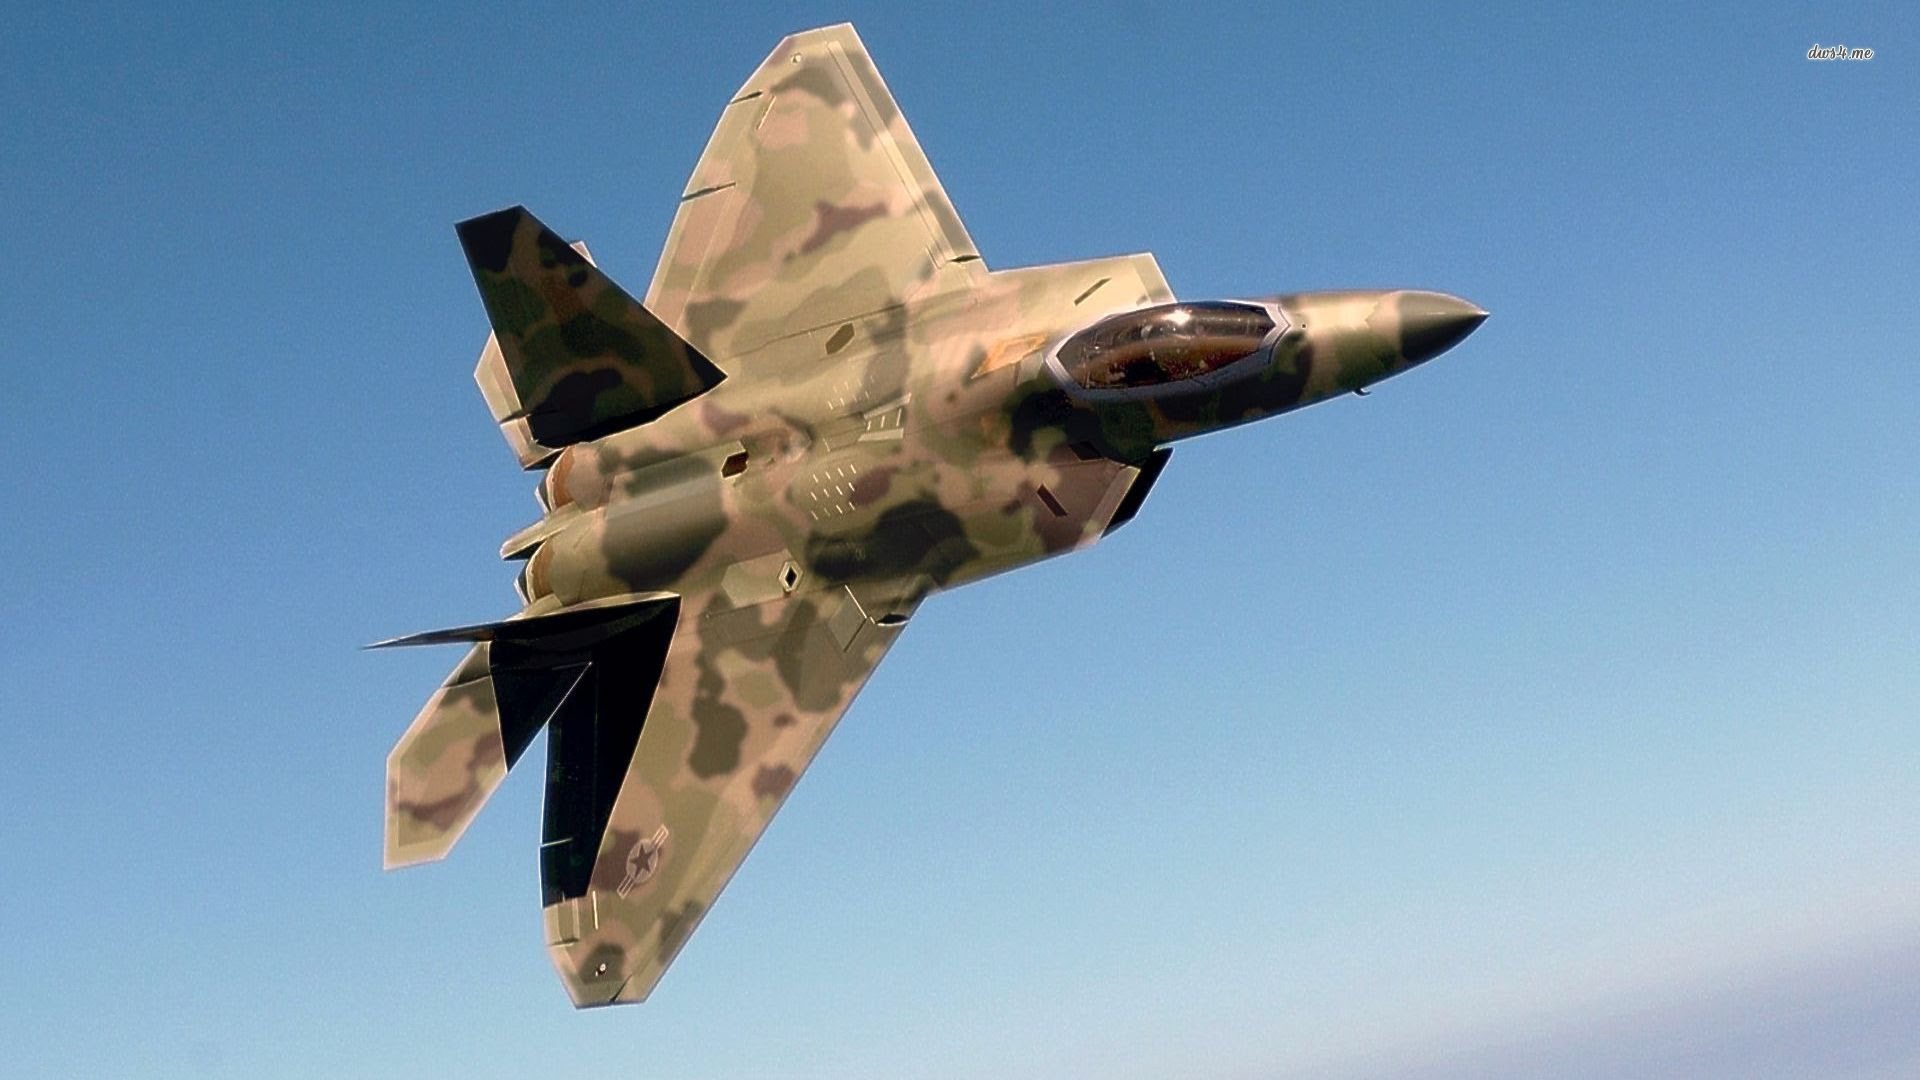 Lockheed Martin F-22 Raptor Backgrounds, Compatible - PC, Mobile, Gadgets| 1920x1080 px